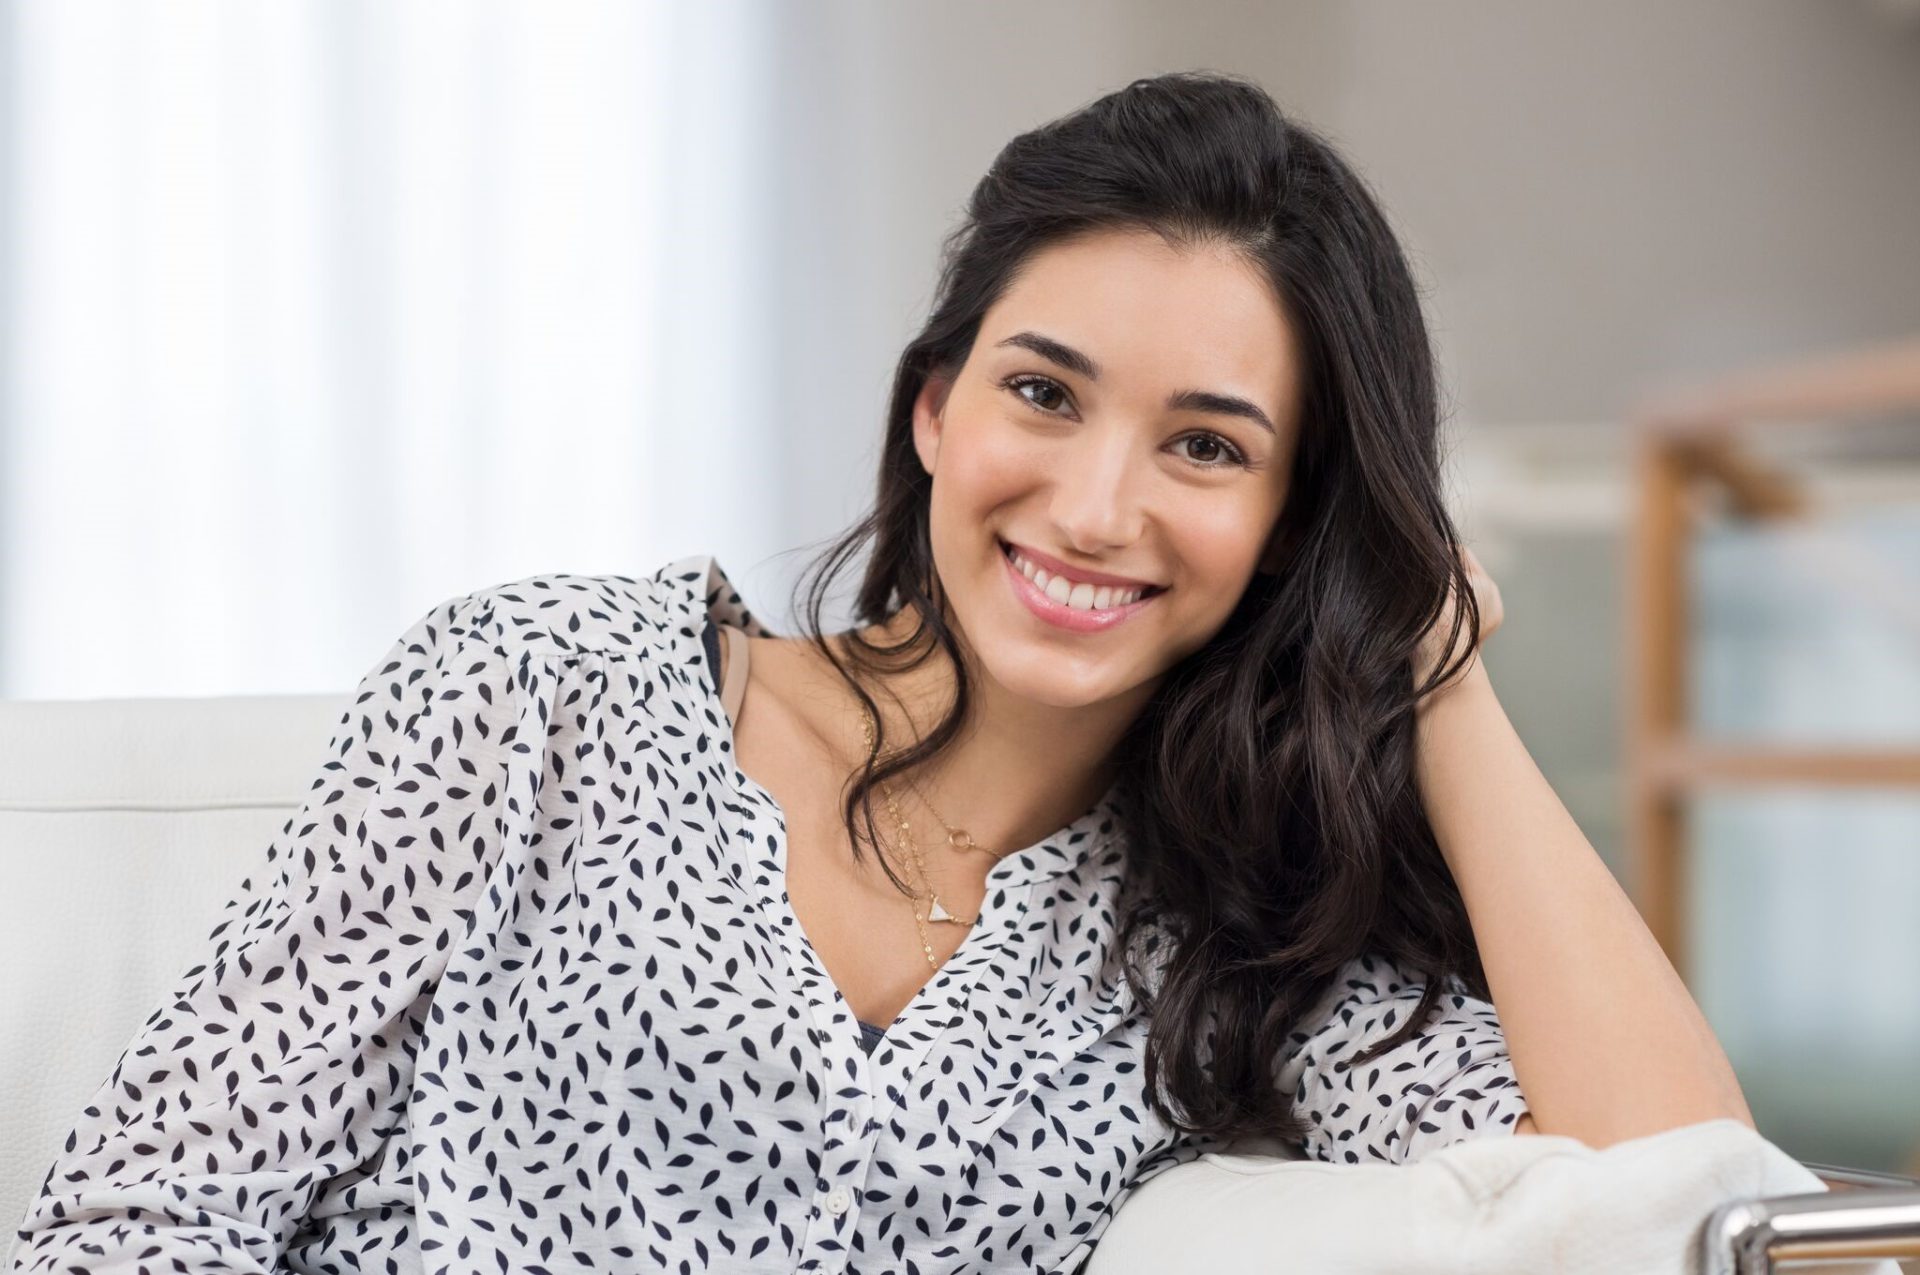 Dentist in Frederick | Self-Care: A Woman’s Priority